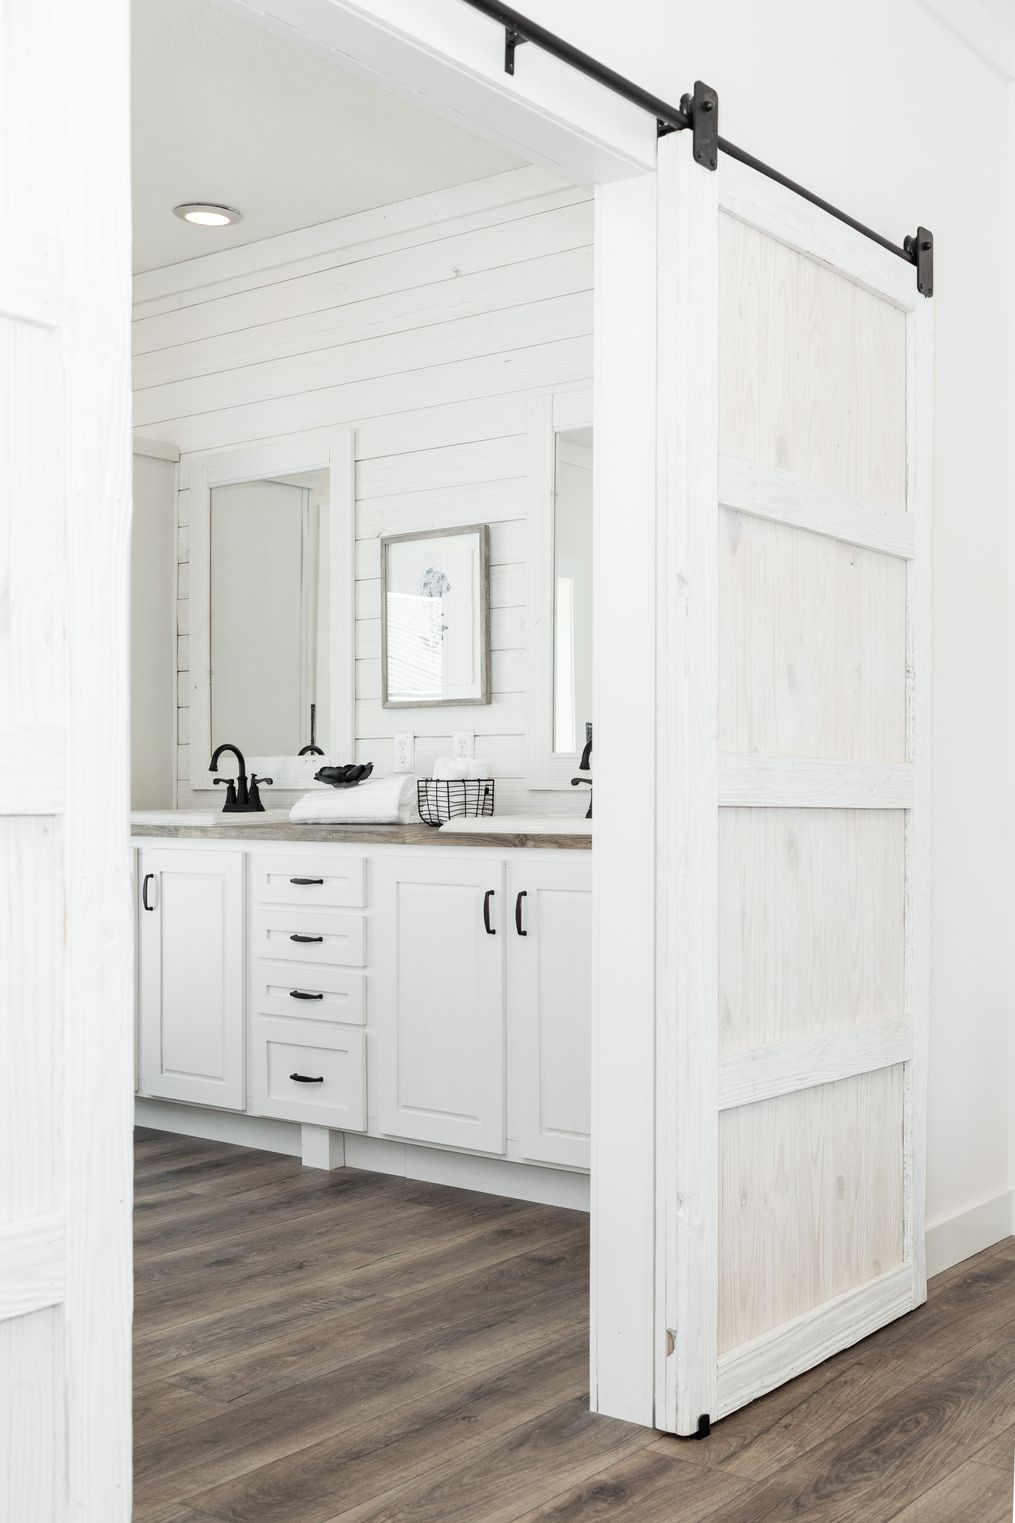 The 1434 CAROLINA "SOUTHERN BELLE" Primary Bathroom. This Manufactured Mobile Home features 3 bedrooms and 2 baths.